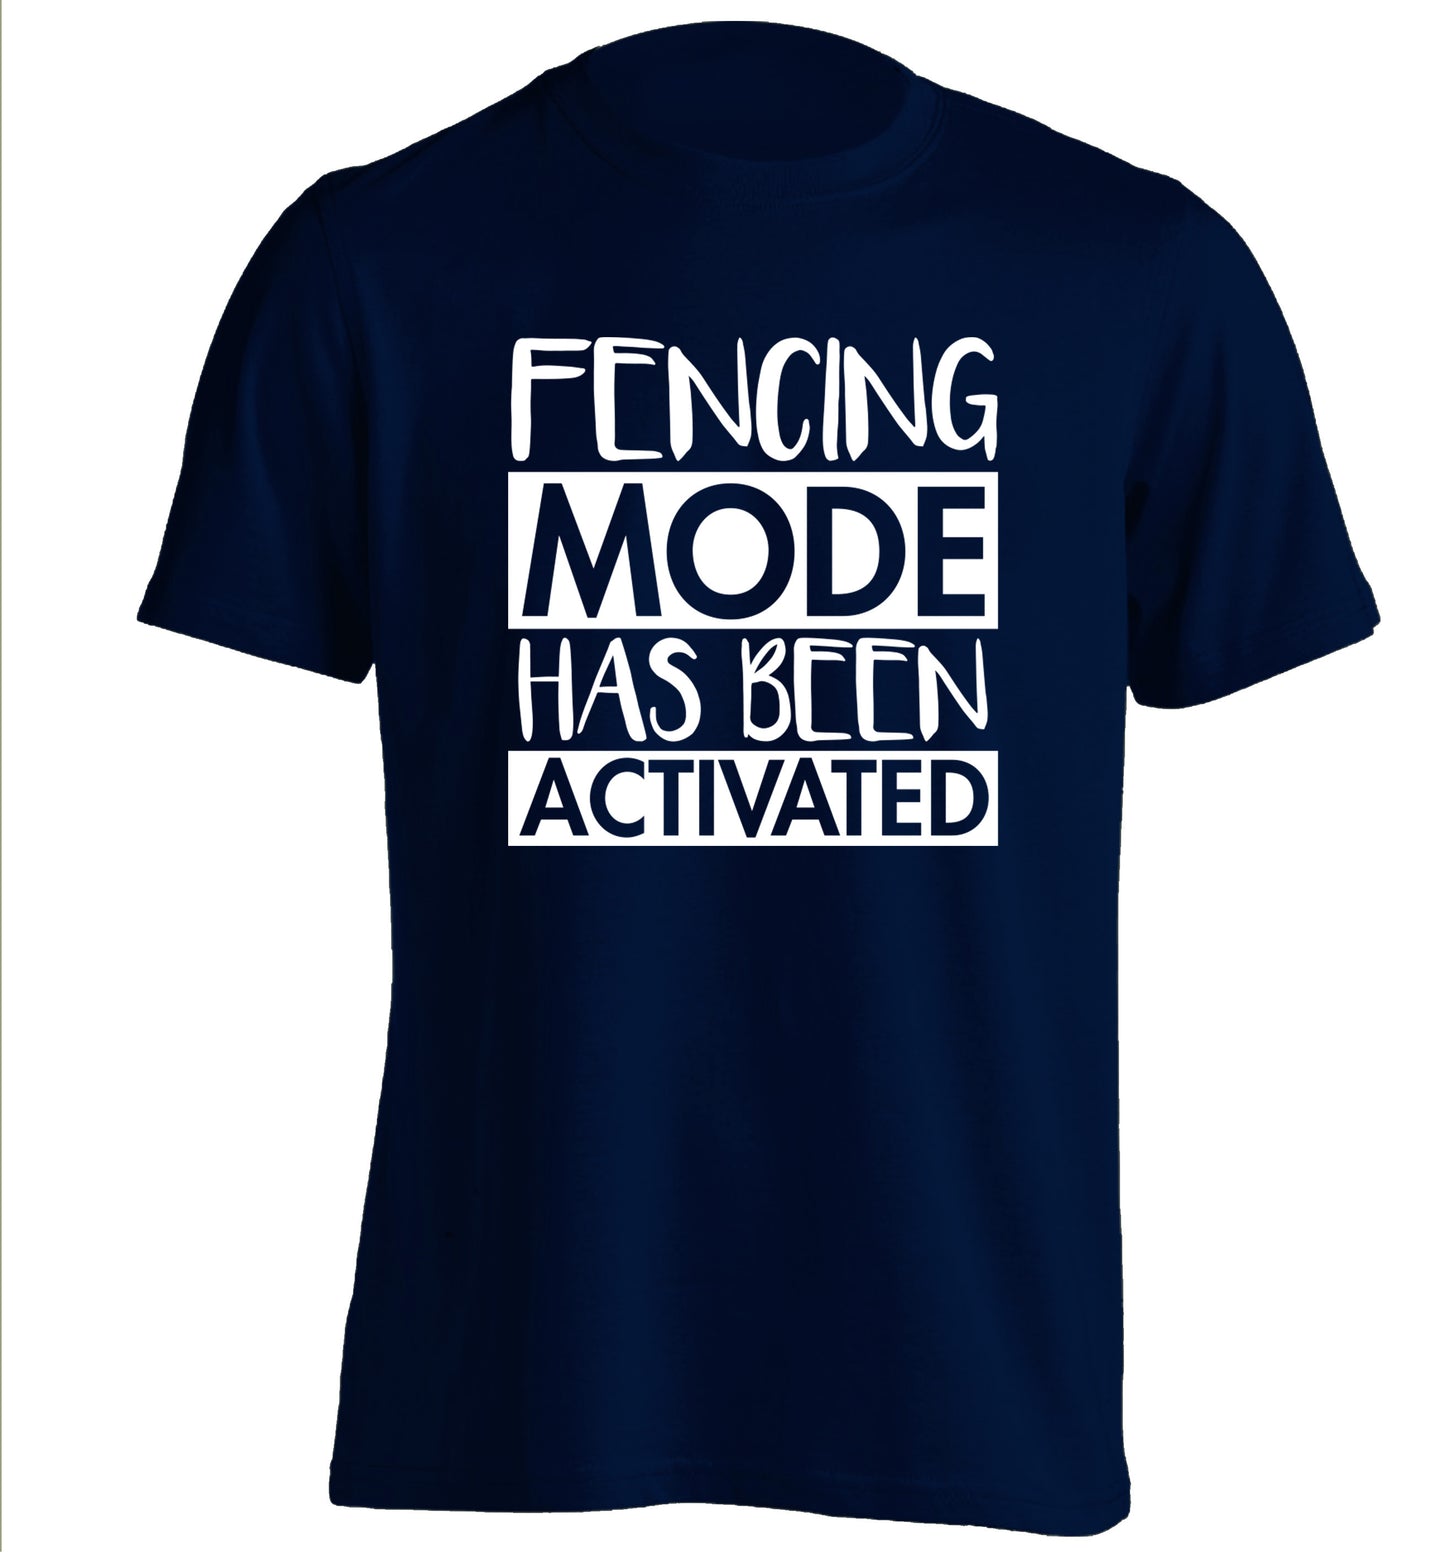 Fencing mode activated adults unisex navy Tshirt 2XL